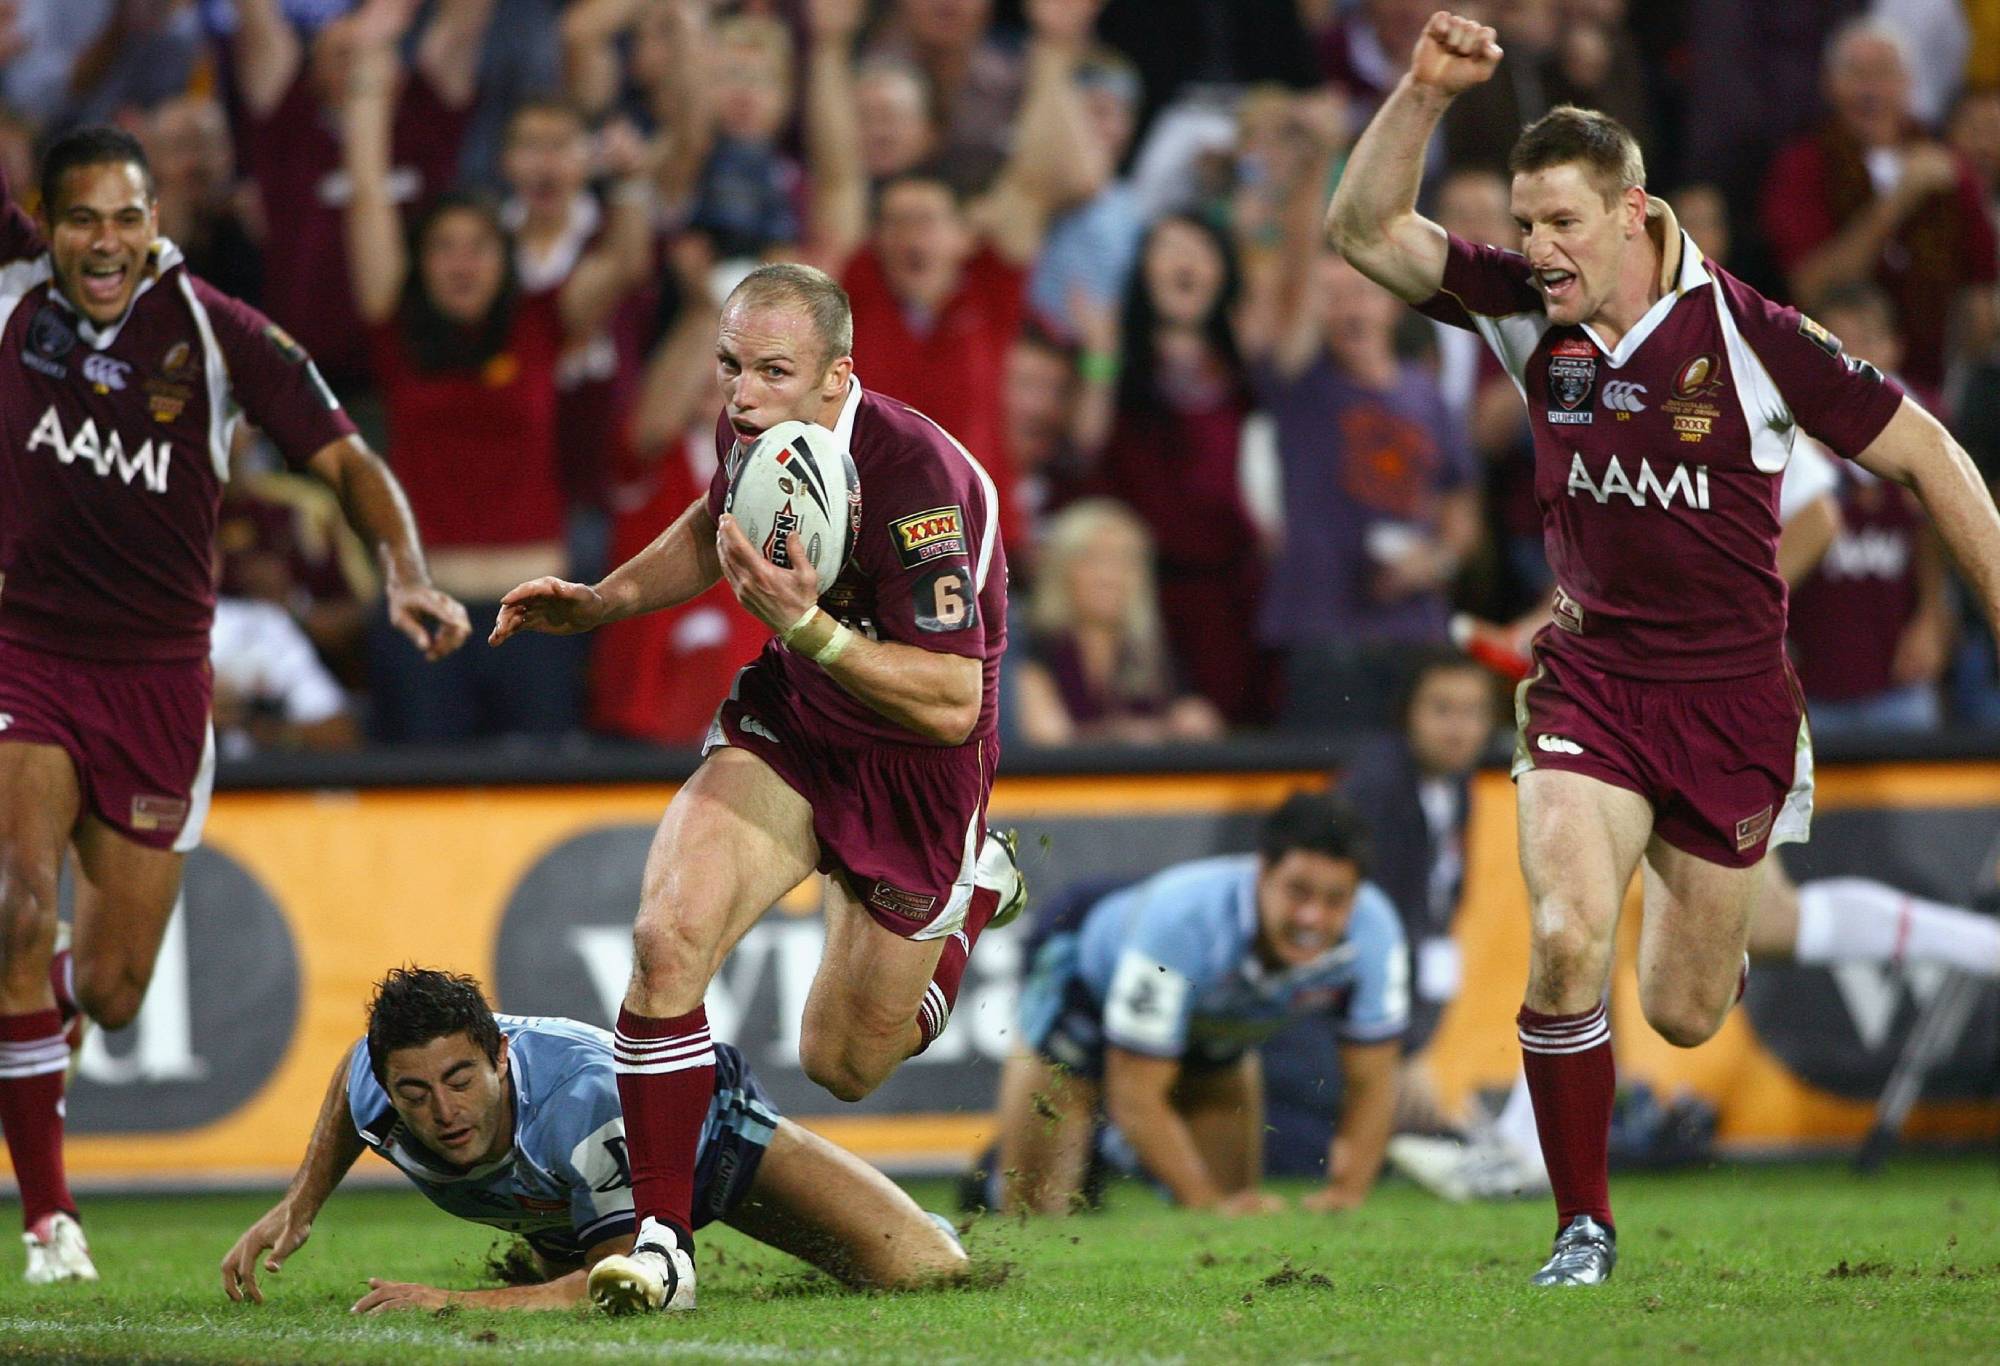 BRISBANE, AUSTRALIA - MAY 23: Darren Lockyer of the Maroons scores a try with team mates Justin Hodges (L) and Brent Tate (R) celebrating in the background during game one of the State of Origin series between the Queensland Maroons and the New South Wales Blues at Suncorp Stadium May 23, 2007 in Brisbane, Australia. (Photo by Bradley Kanaris/Getty Images)